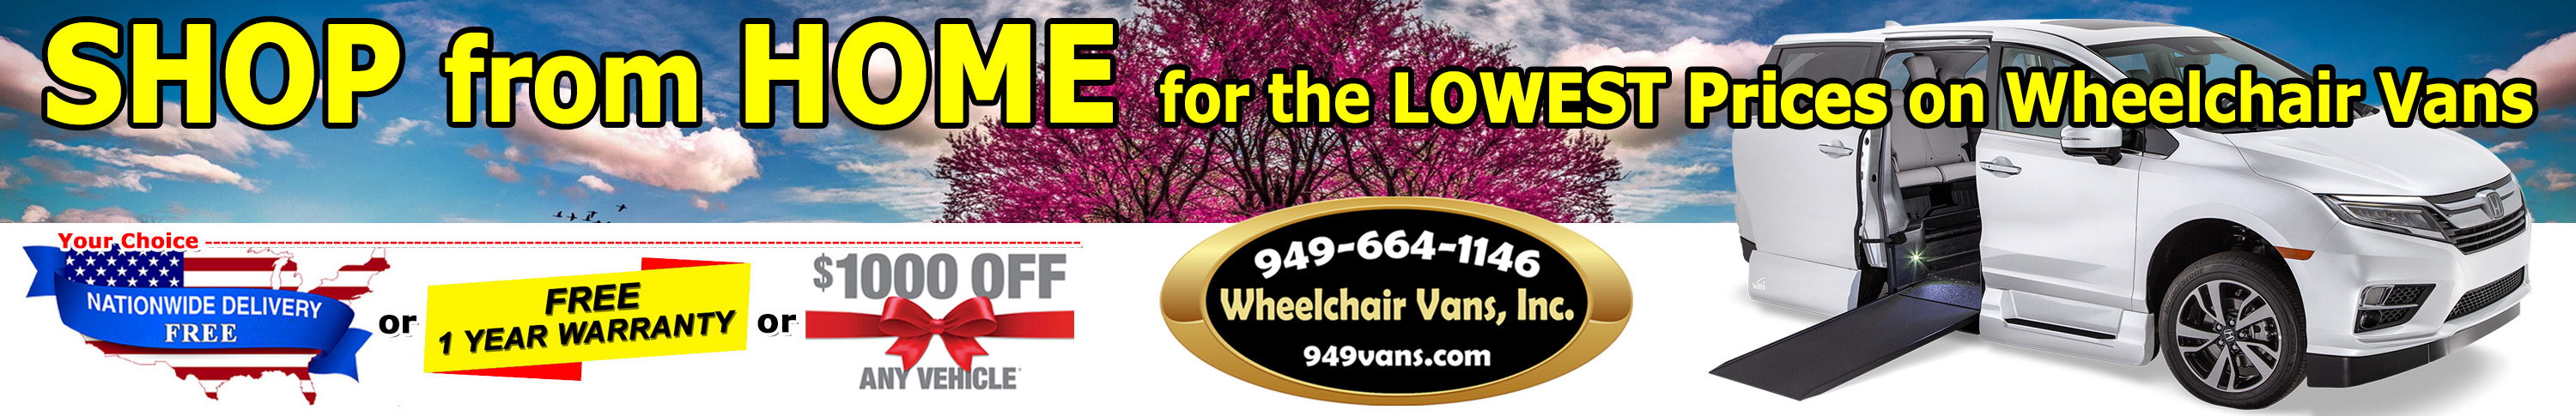 Spring 2023 Wheelchair Van Clearance Event has started at Wheelchair Vans Inc. Reduced Prices on Wheelchair Vans.  Shop from HOME for the LOWEST Prices on Wheelchair Vans  FREE Nationwide Shipping or  FREE 12 Month/12,000 mile Bumper to Bumper Warranty* or  $1,000 OFF all Wheelchair Vans in stock 